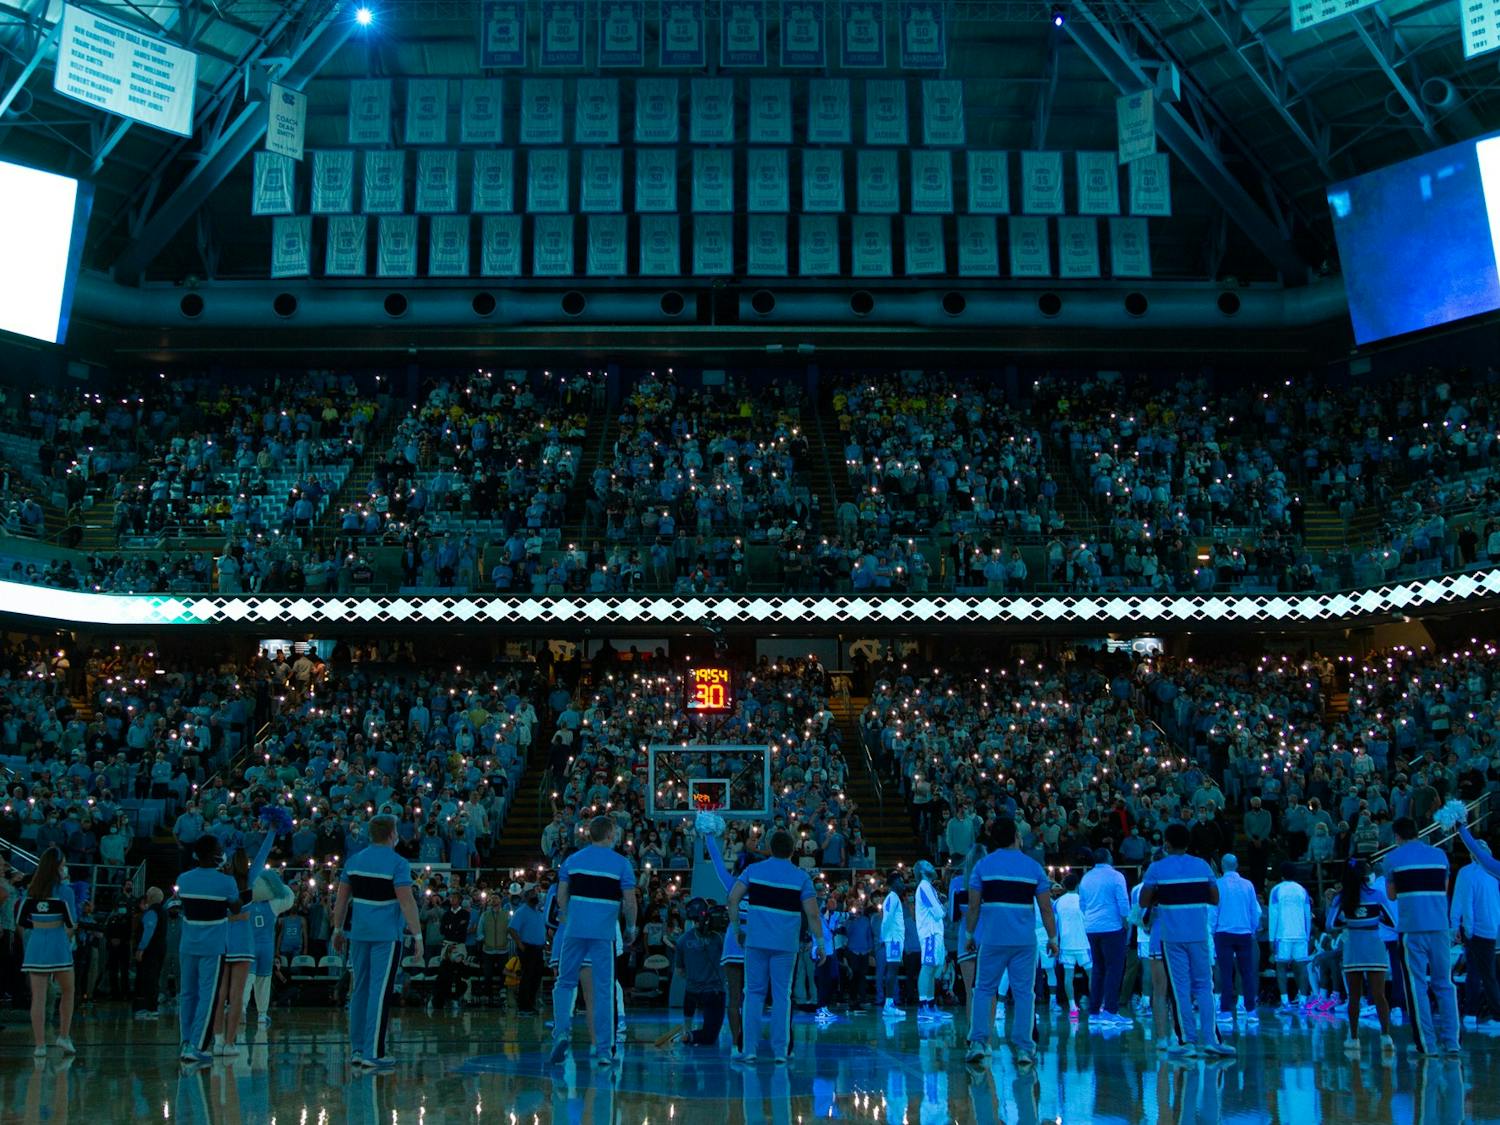 The UNC cheerleading team prepares to amp up fans at the Dean E. Smith Center before UNC basketball's home game against Michigan on Wednesday, Dec. 1, 2021. 